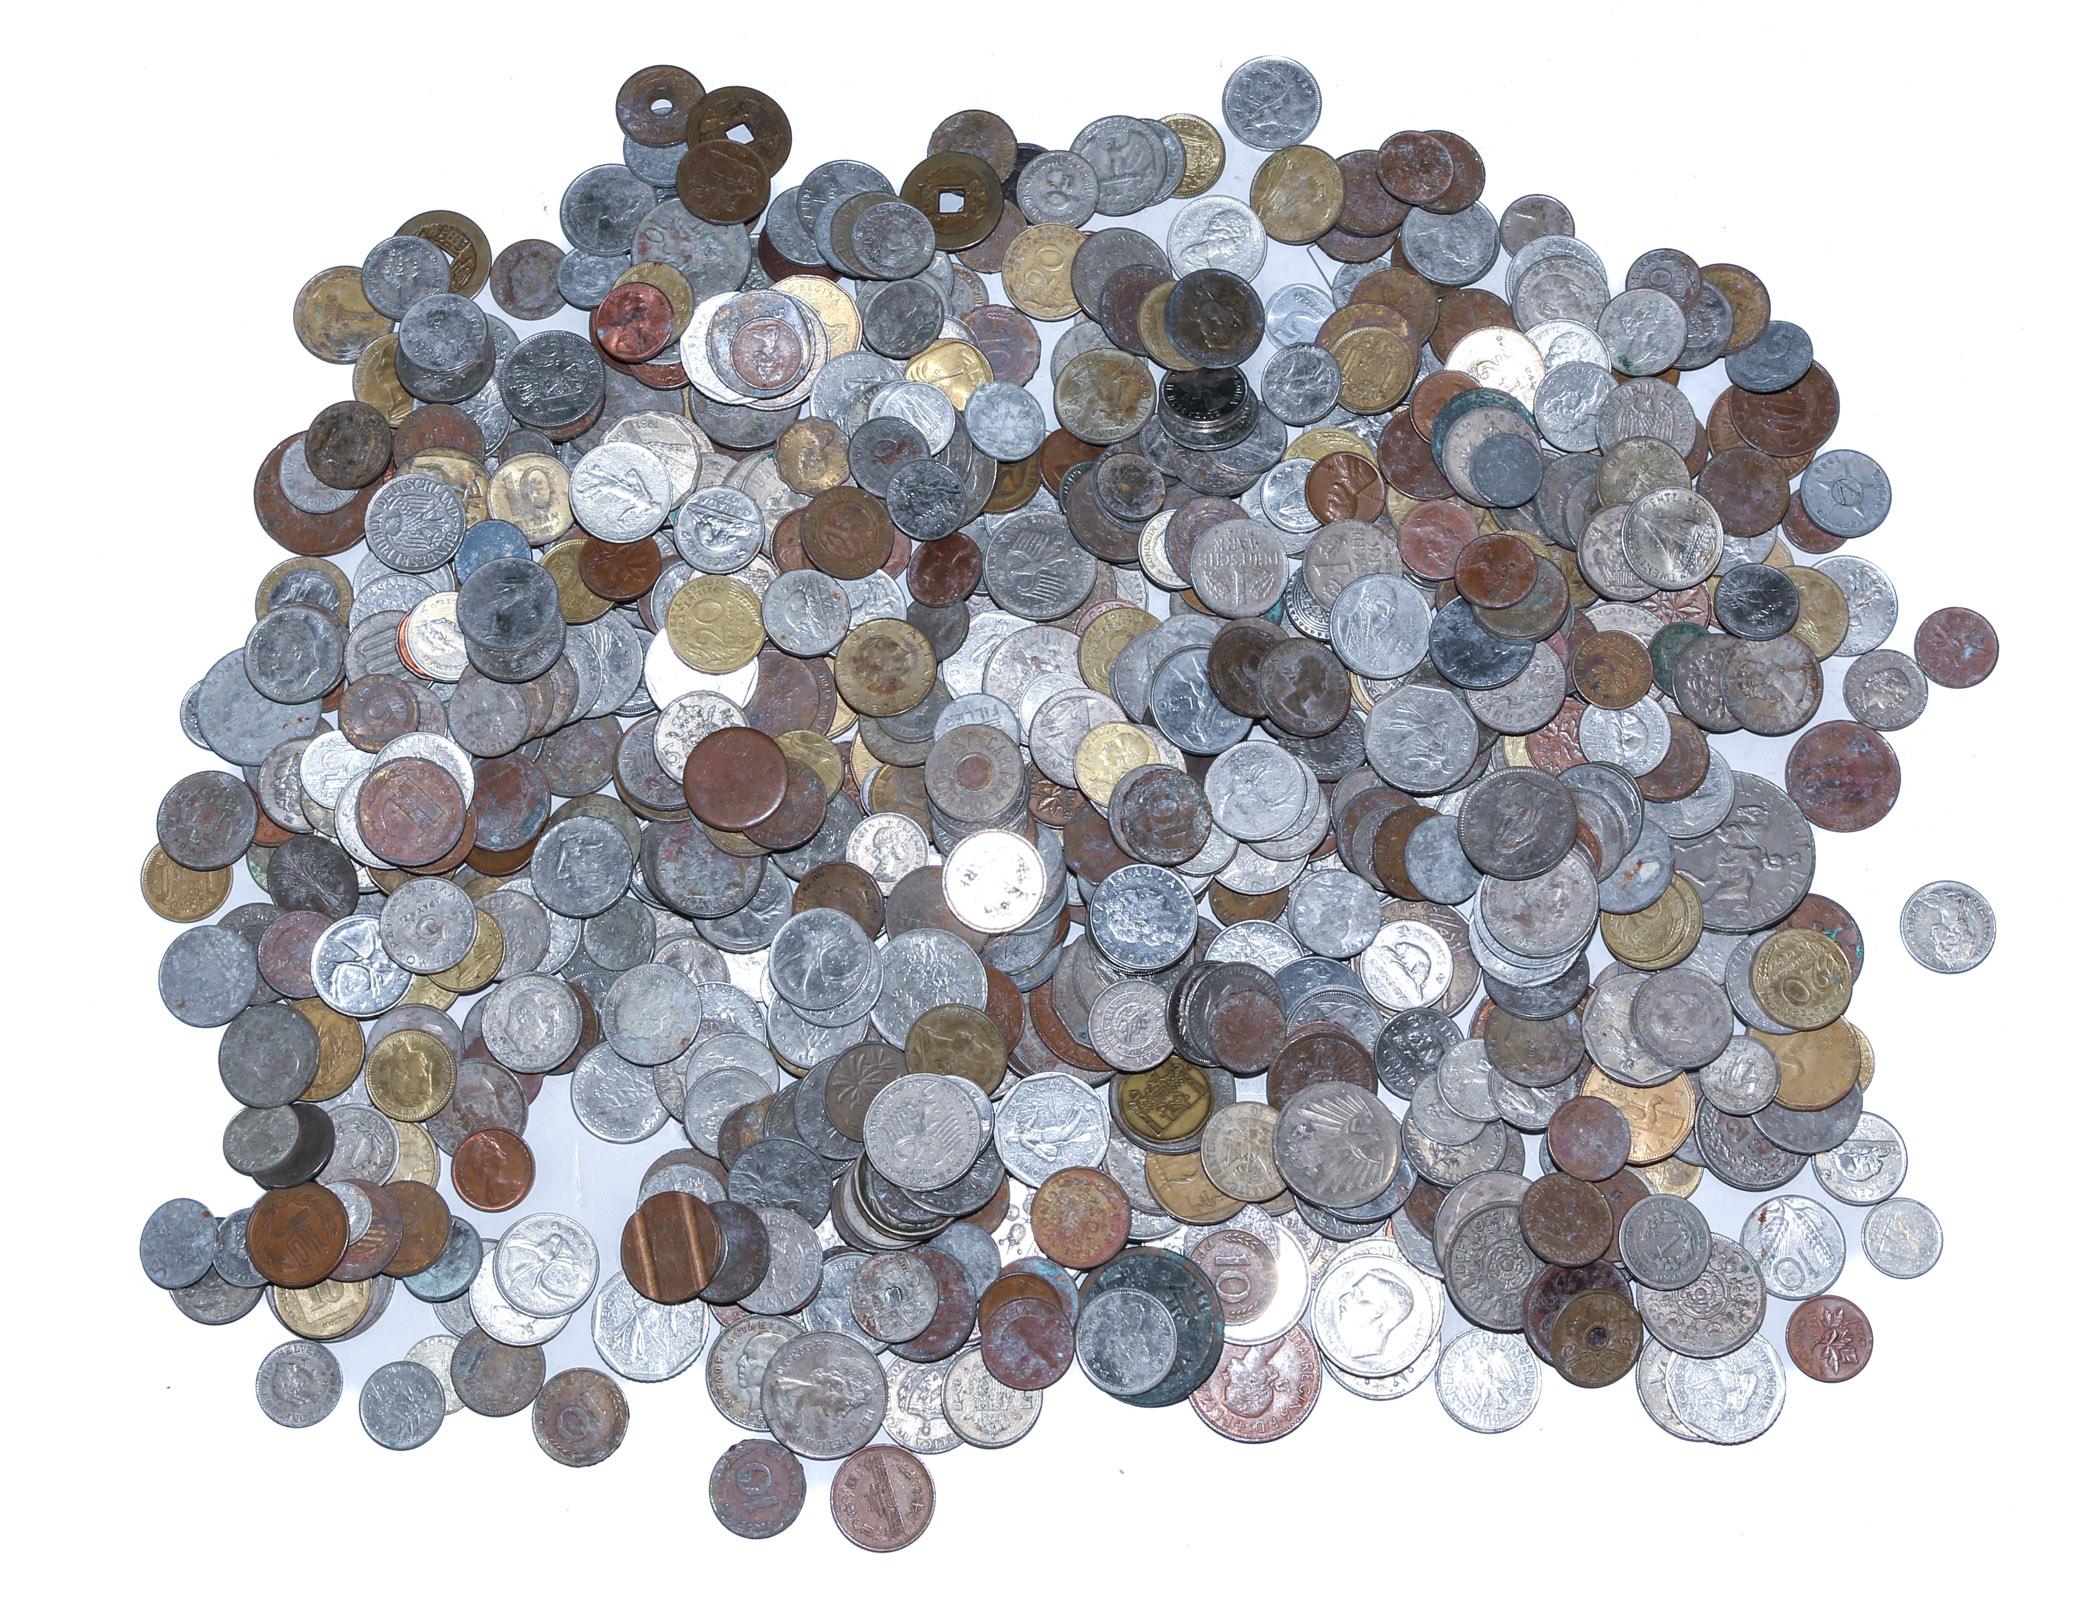 VERY LARGE BAG OF WORLD COINS A 308a9e